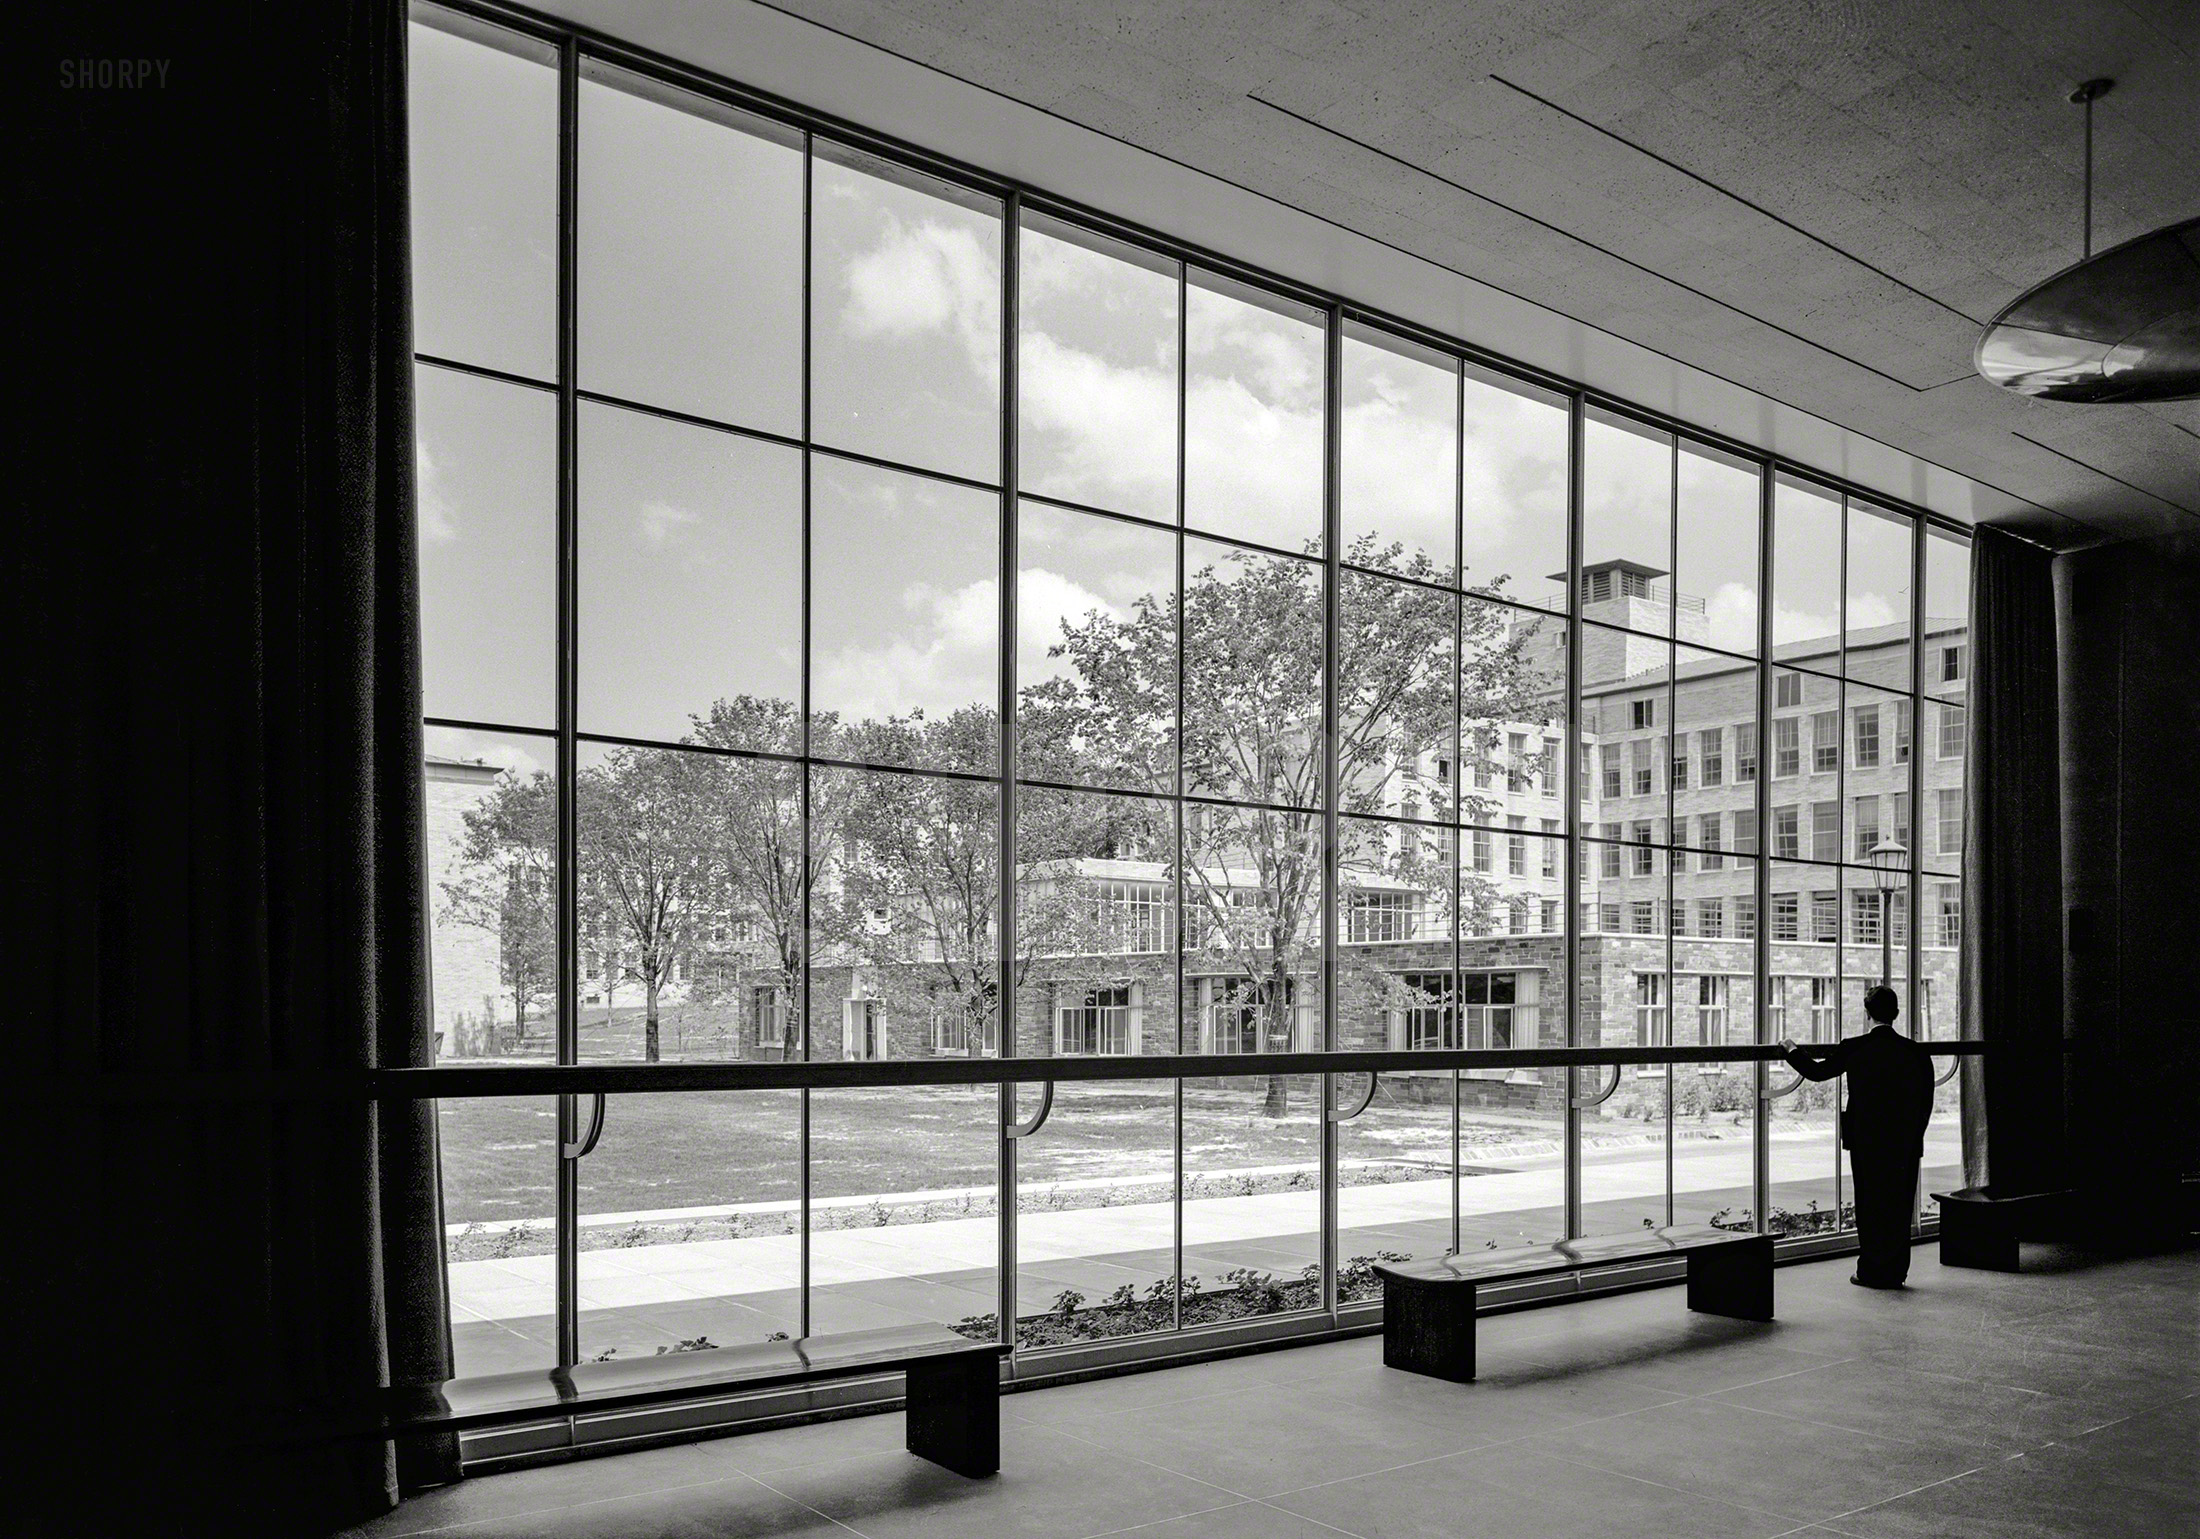 May 25, 1942. "Bell Telephone Laboratories, Murray Hill, New Jersey. View through acoustics foyer window." With a barrier for the more absent-minded scientists. 5x7 acetate negative by Gottscho-Schleisner. View full size.